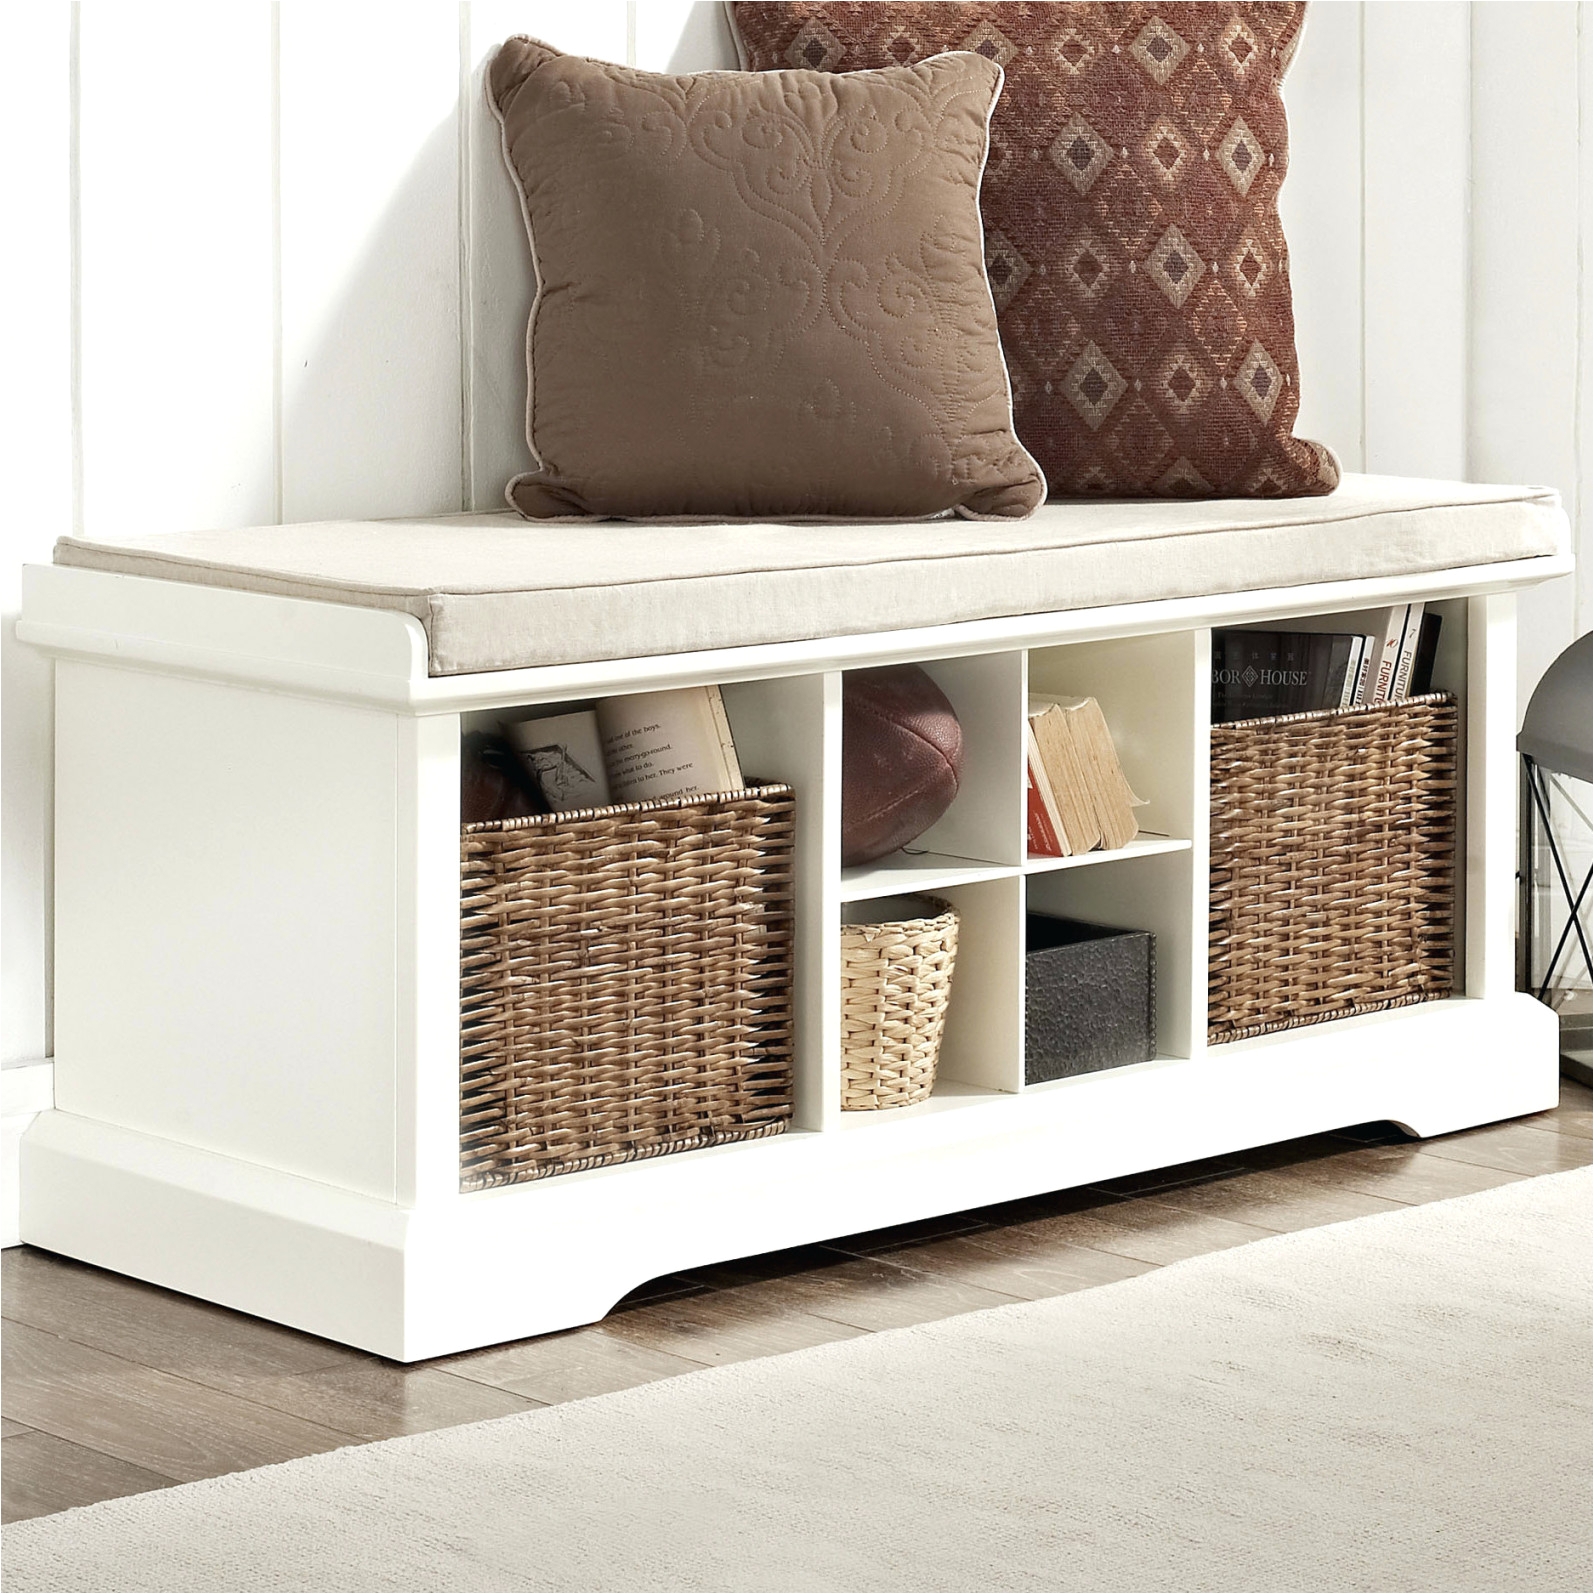 coat rack with storage bench storage chest seat bench hallway with hooks white shoes